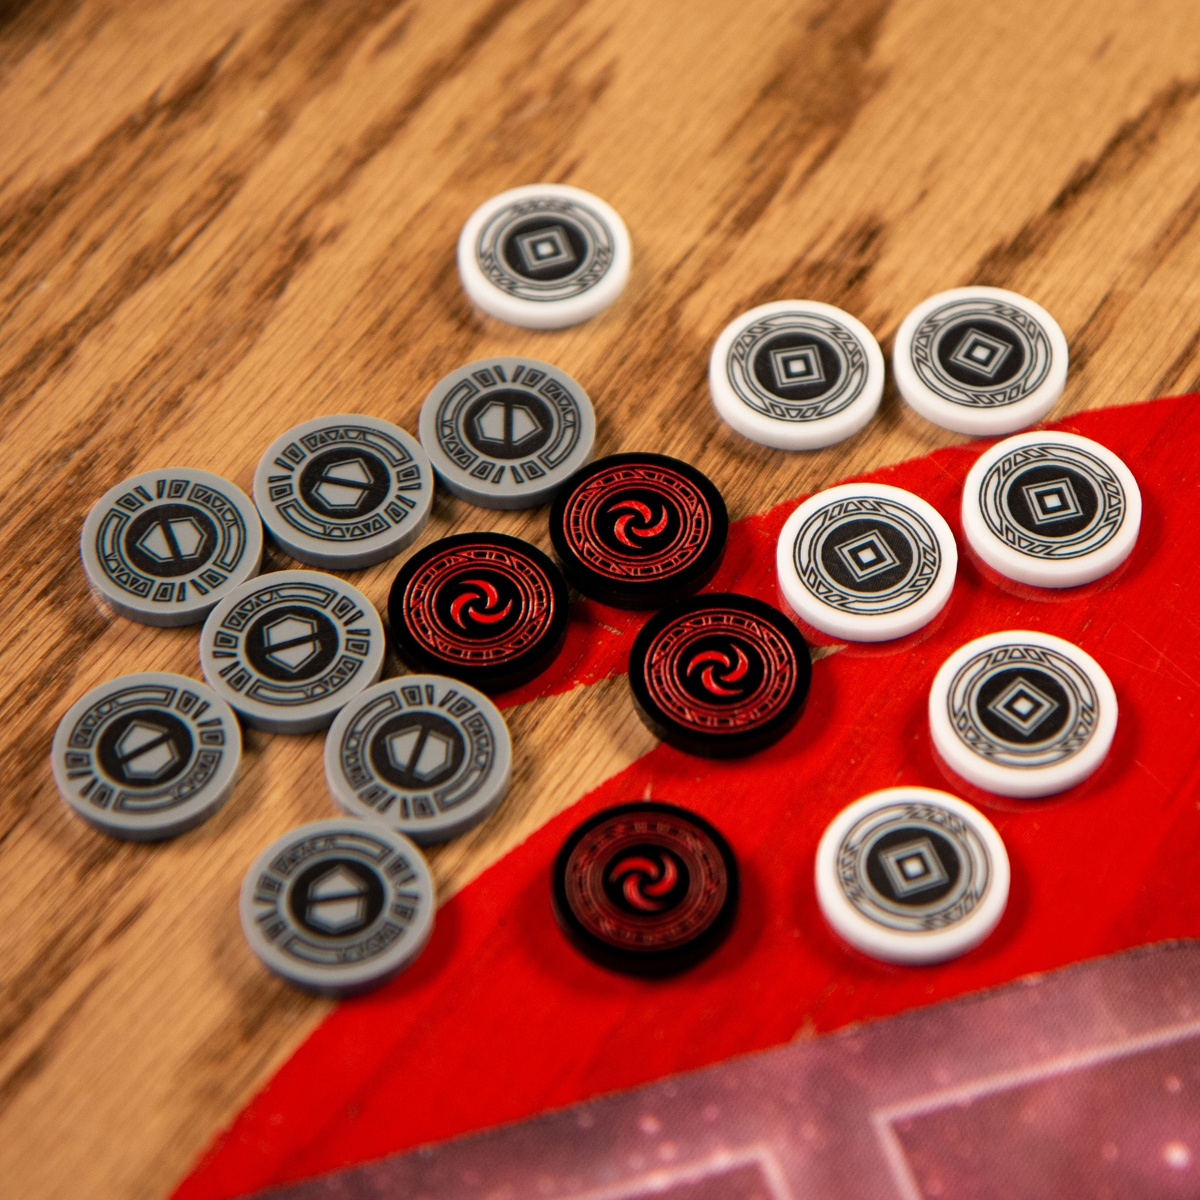 Eight Armor Tokens, four Resource Tokens, and seven Activation Tokens displayed on a wooden table